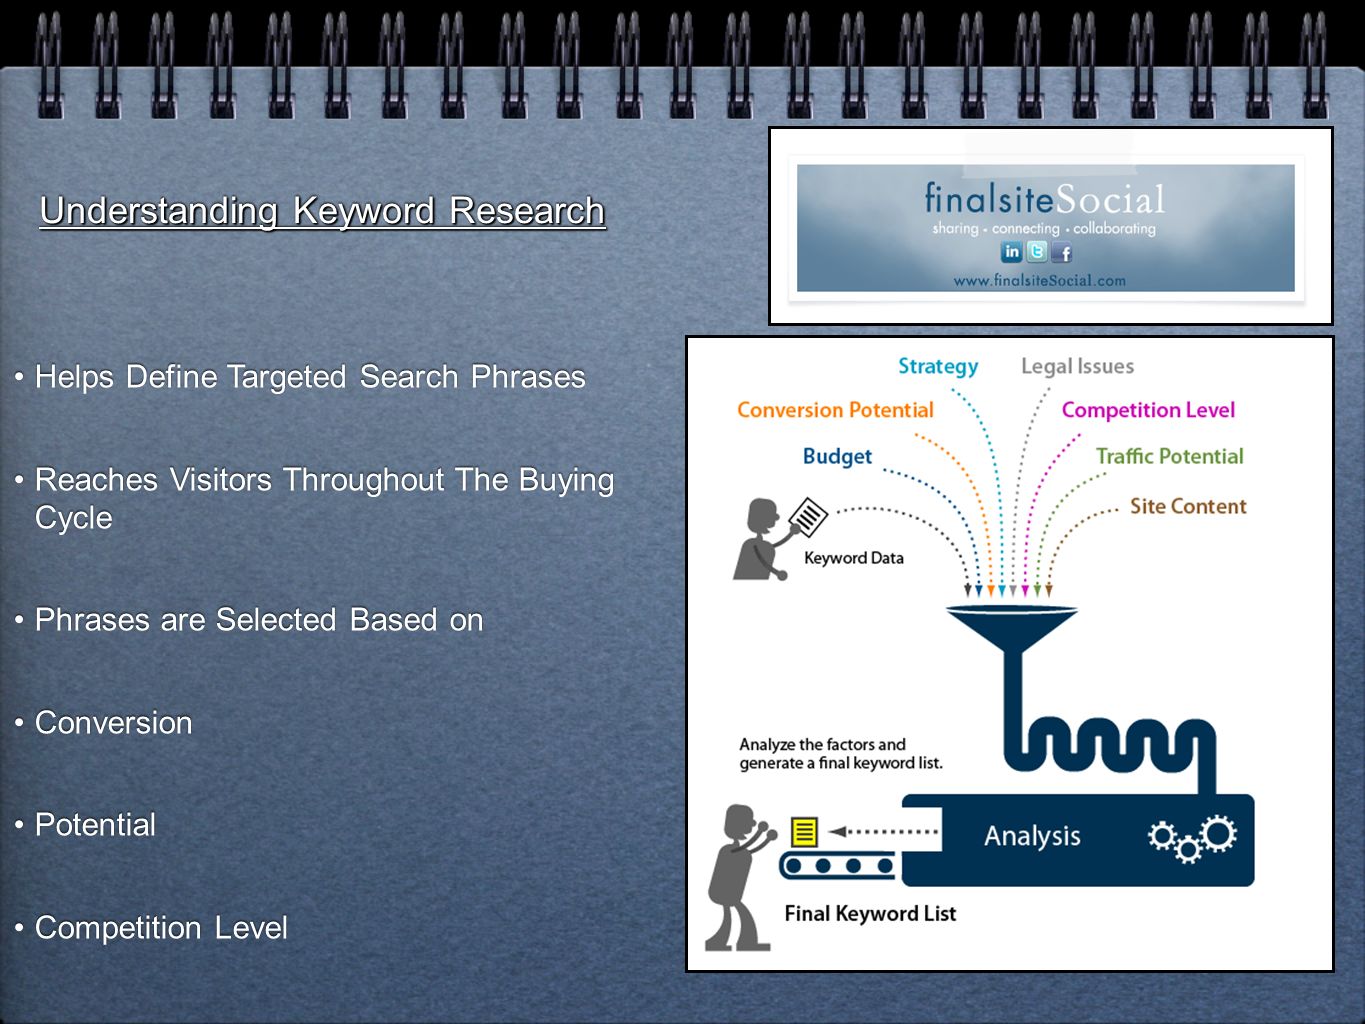 Understanding Keyword Research Helps Define Targeted Search Phrases Reaches Visitors Throughout The Buying Cycle Phrases are Selected Based on Conversion Potential Competition Level Helps Define Targeted Search Phrases Reaches Visitors Throughout The Buying Cycle Phrases are Selected Based on Conversion Potential Competition Level